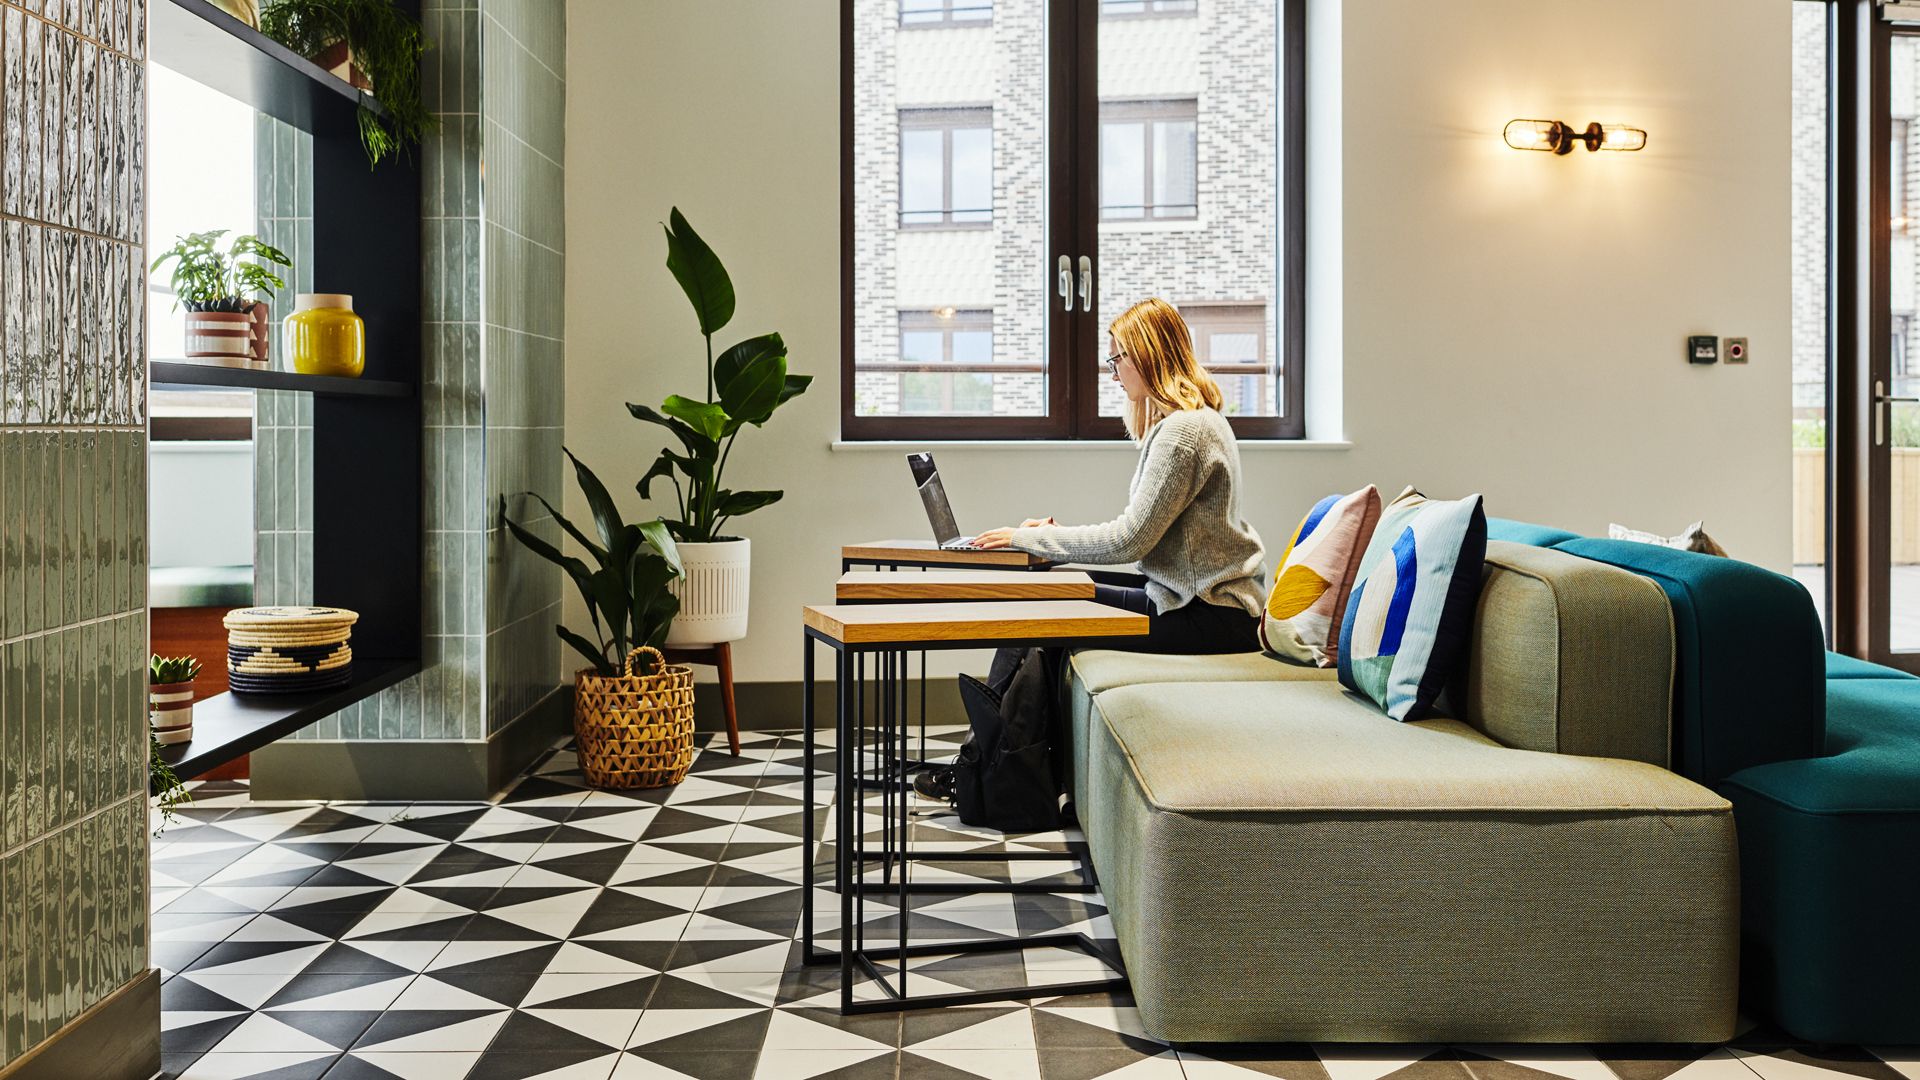 What are co-living spaces and how much do they cost?